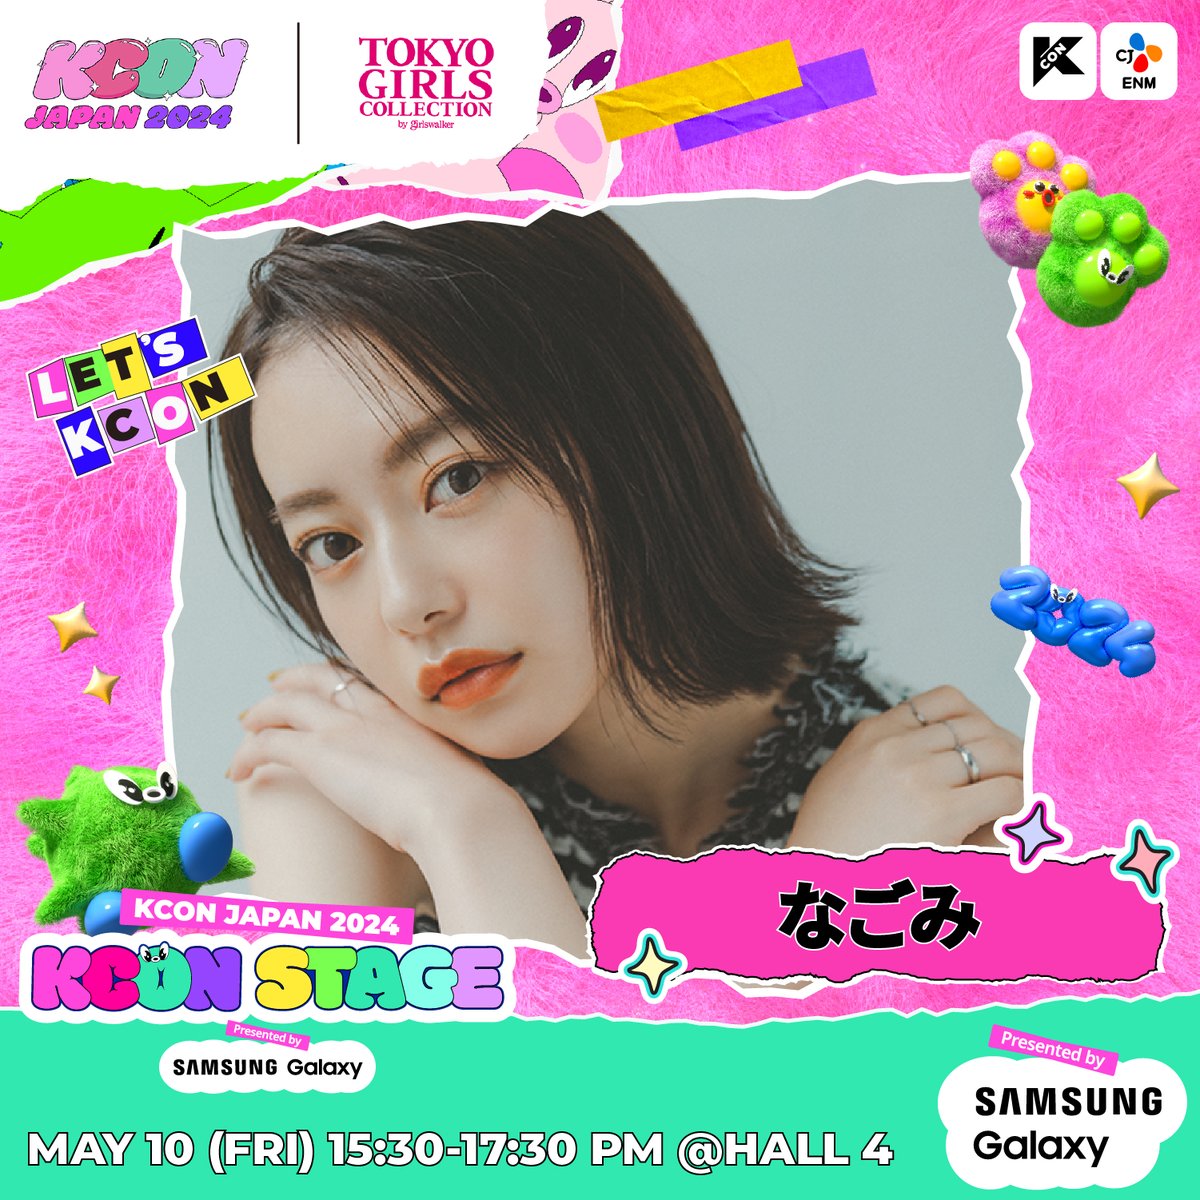 [#KCONJAPAN2024] TOKYO GIRLS COLLECTION LINEUP 📍 MAY 10 (FRI) 15:30 ~ 17:30PM 📍 KCON STAGE HALL 4 💙FROM TGC #川口ゆりな / @Kwgc_yrn0619 #鶴嶋乃愛 / @felonyrose__n #なごみ / @NAGOMI3232 📢GET YOUR TICKET NOW 🎫 bit.ly/3vrYG1I